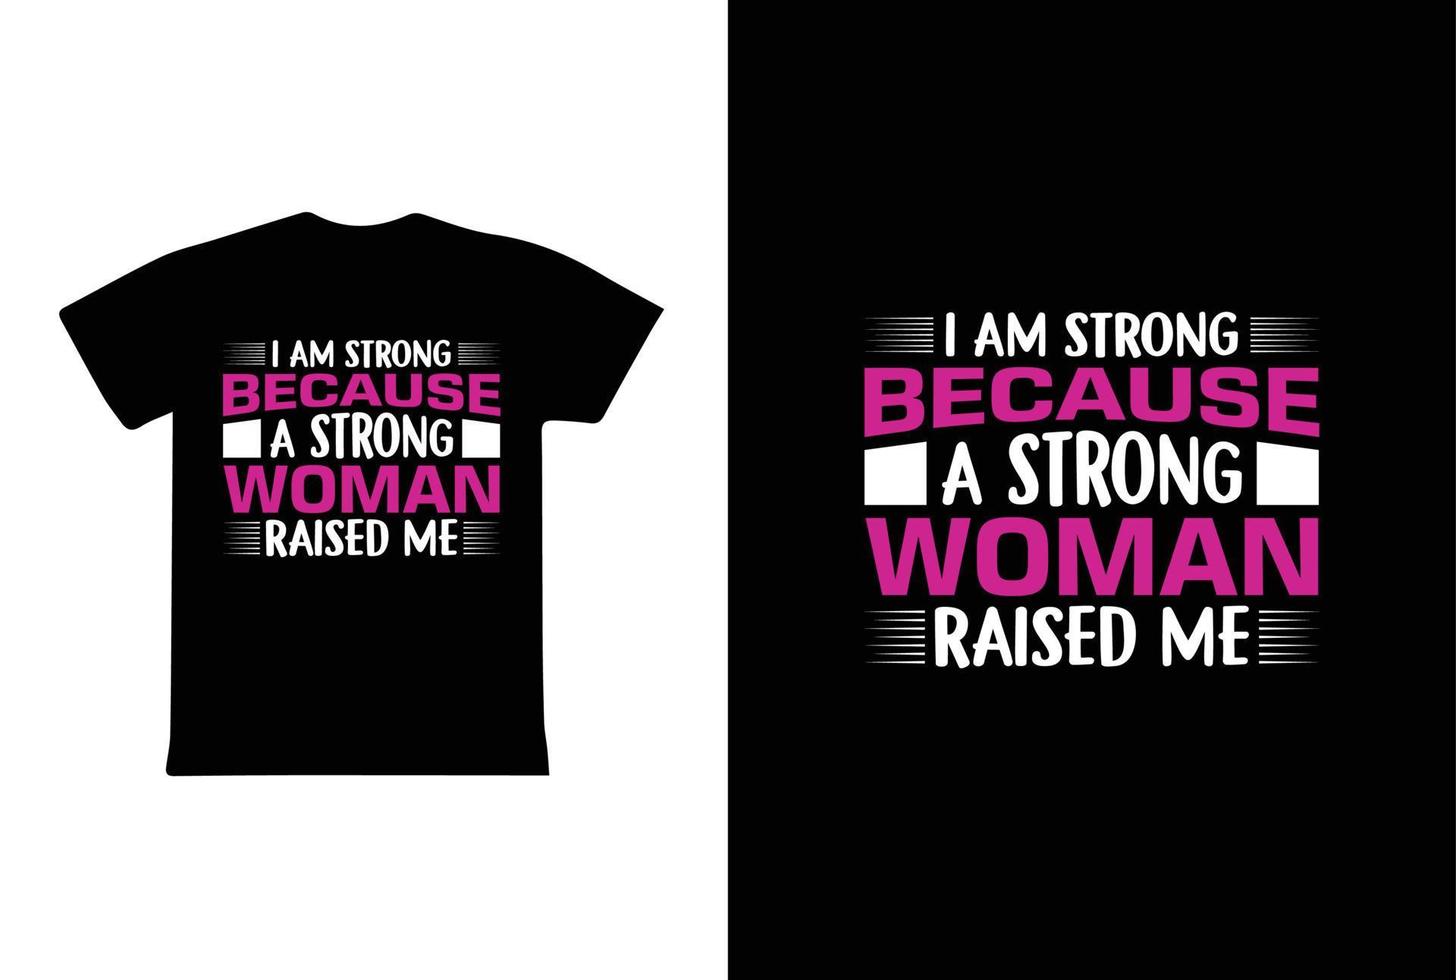 I Am Strong Because A Strong Woman Raised Me. Women's day 8 march t-shirt design template vector